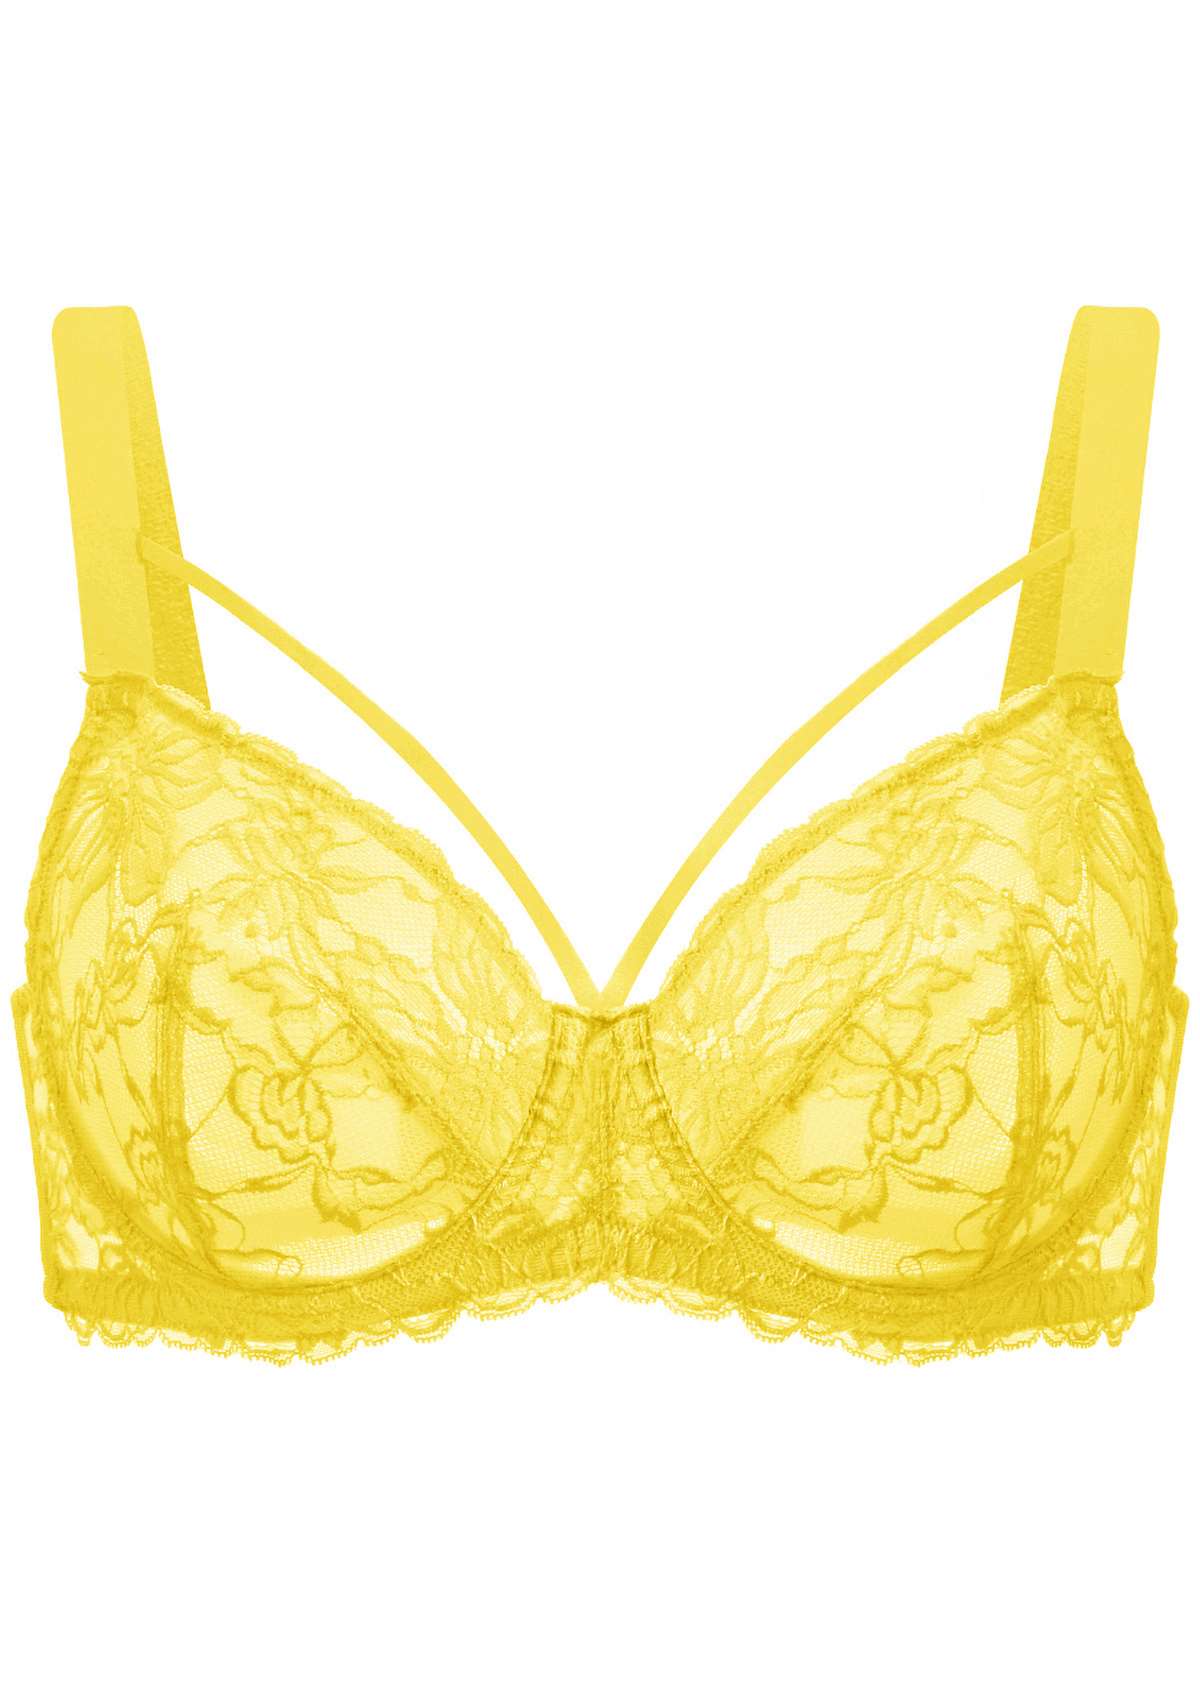 HSIA Unlined Lace Mesh Minimizer Bra For Large Breasts, Full Coverage - Bright Yellow / 38 / C